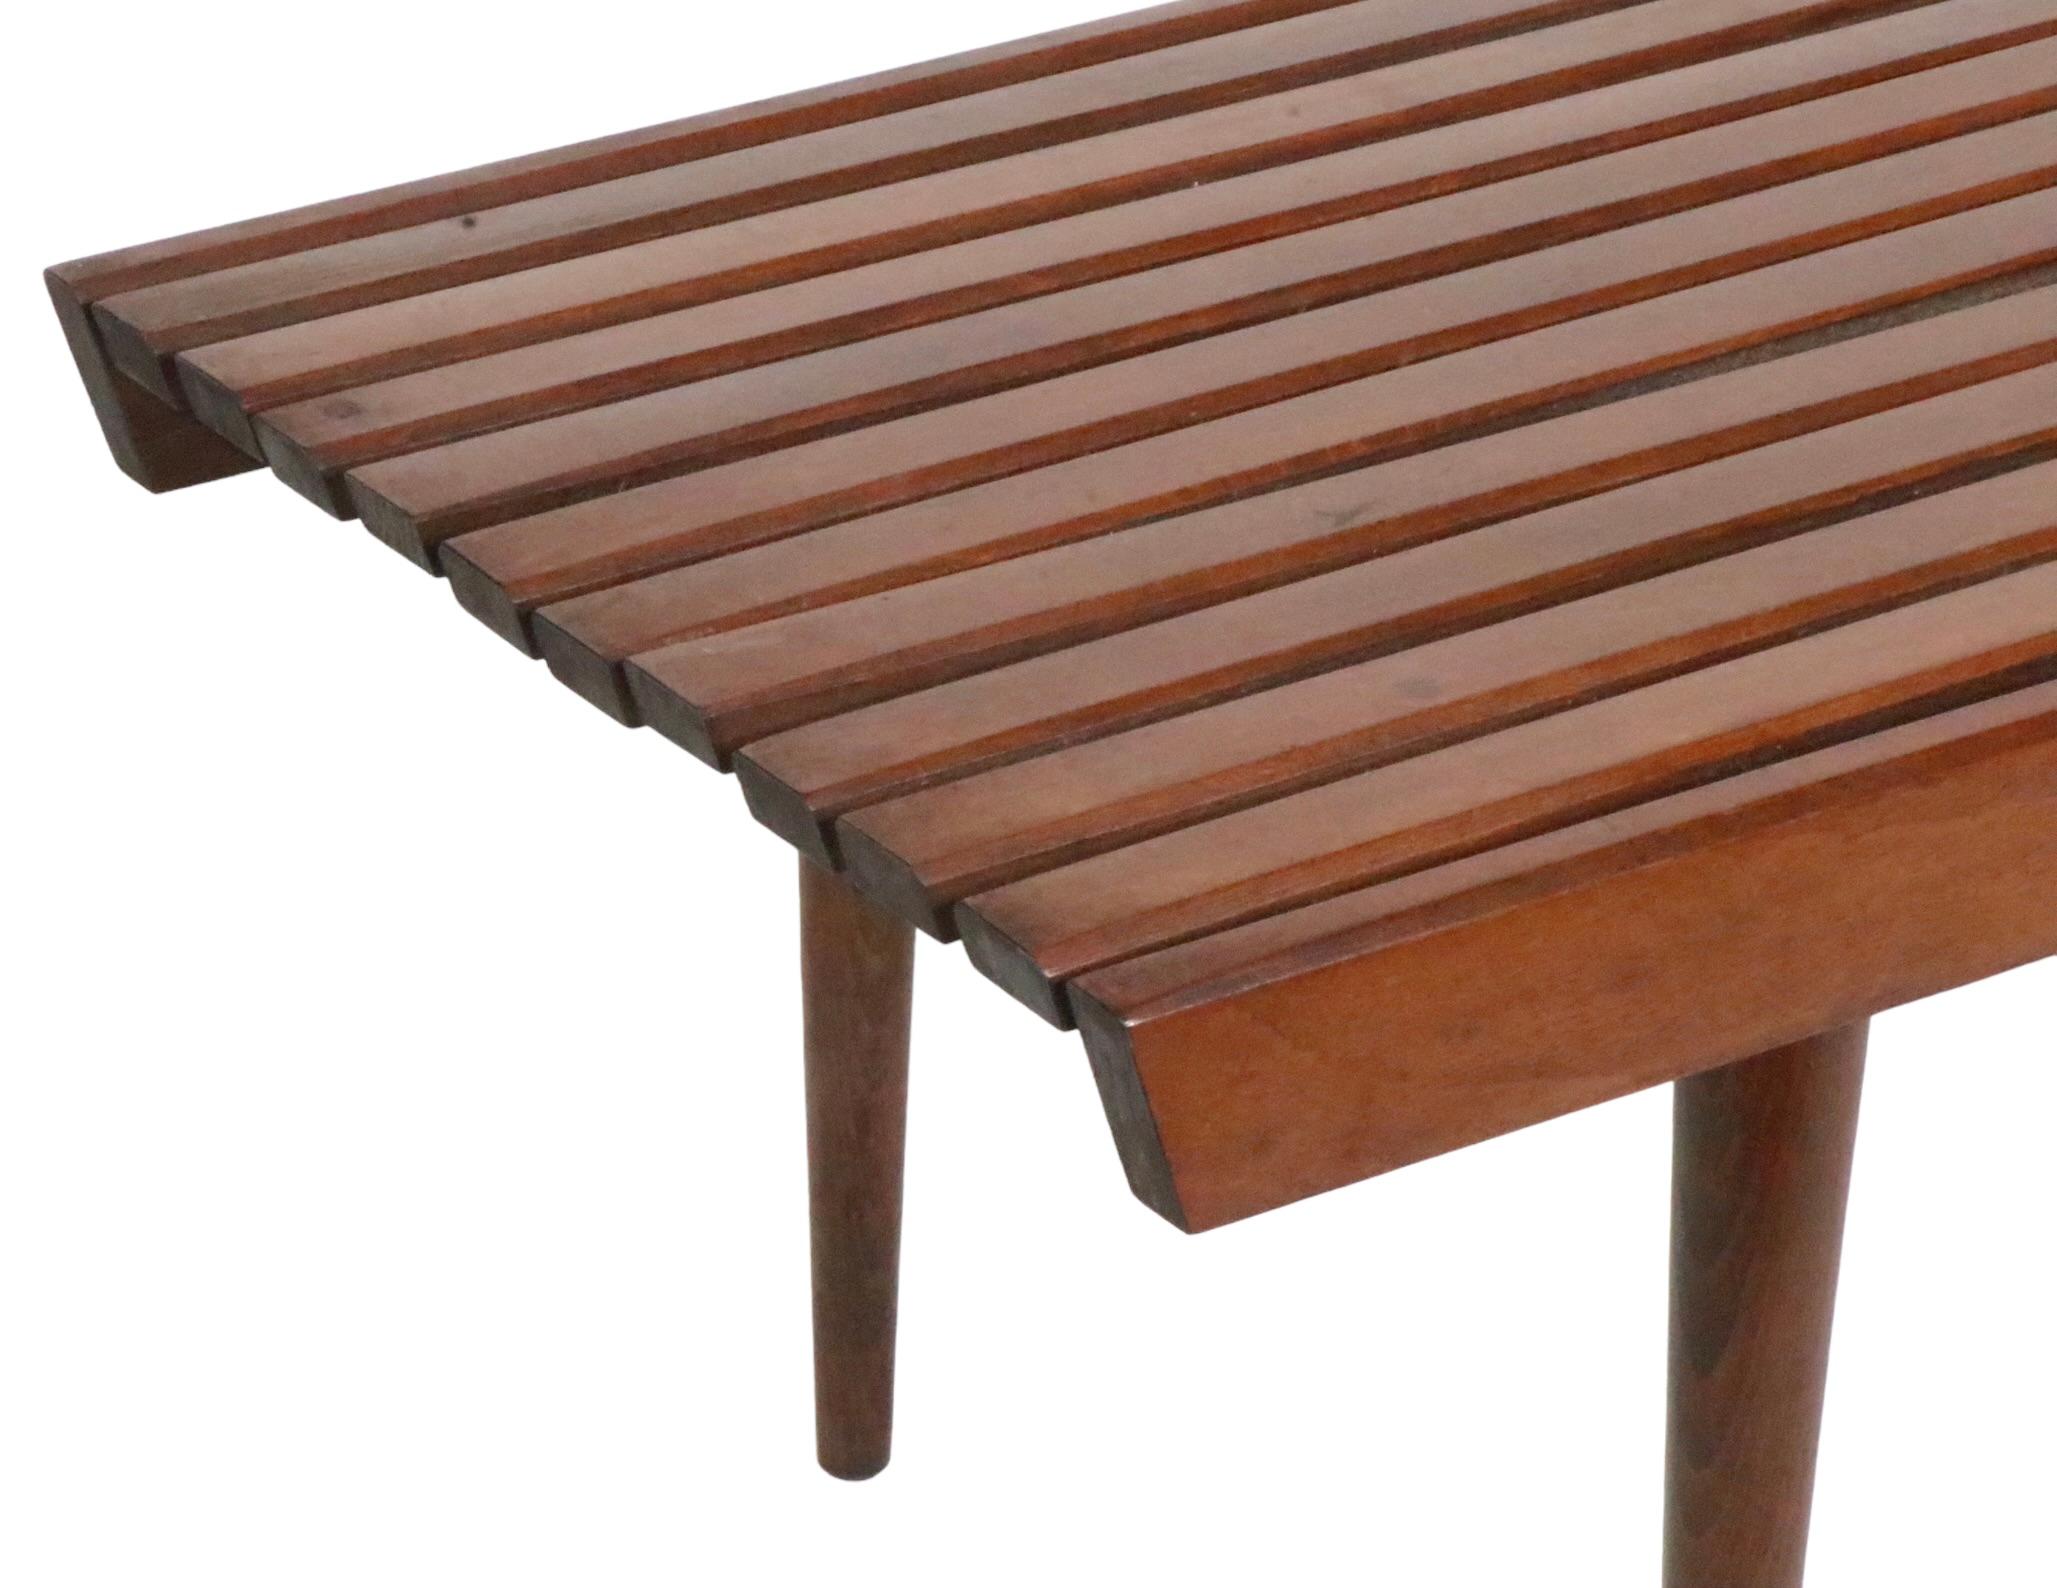 20th Century Mid Century Slat Bench Coffee Table Made in Yugoslavia C 1950s For Sale